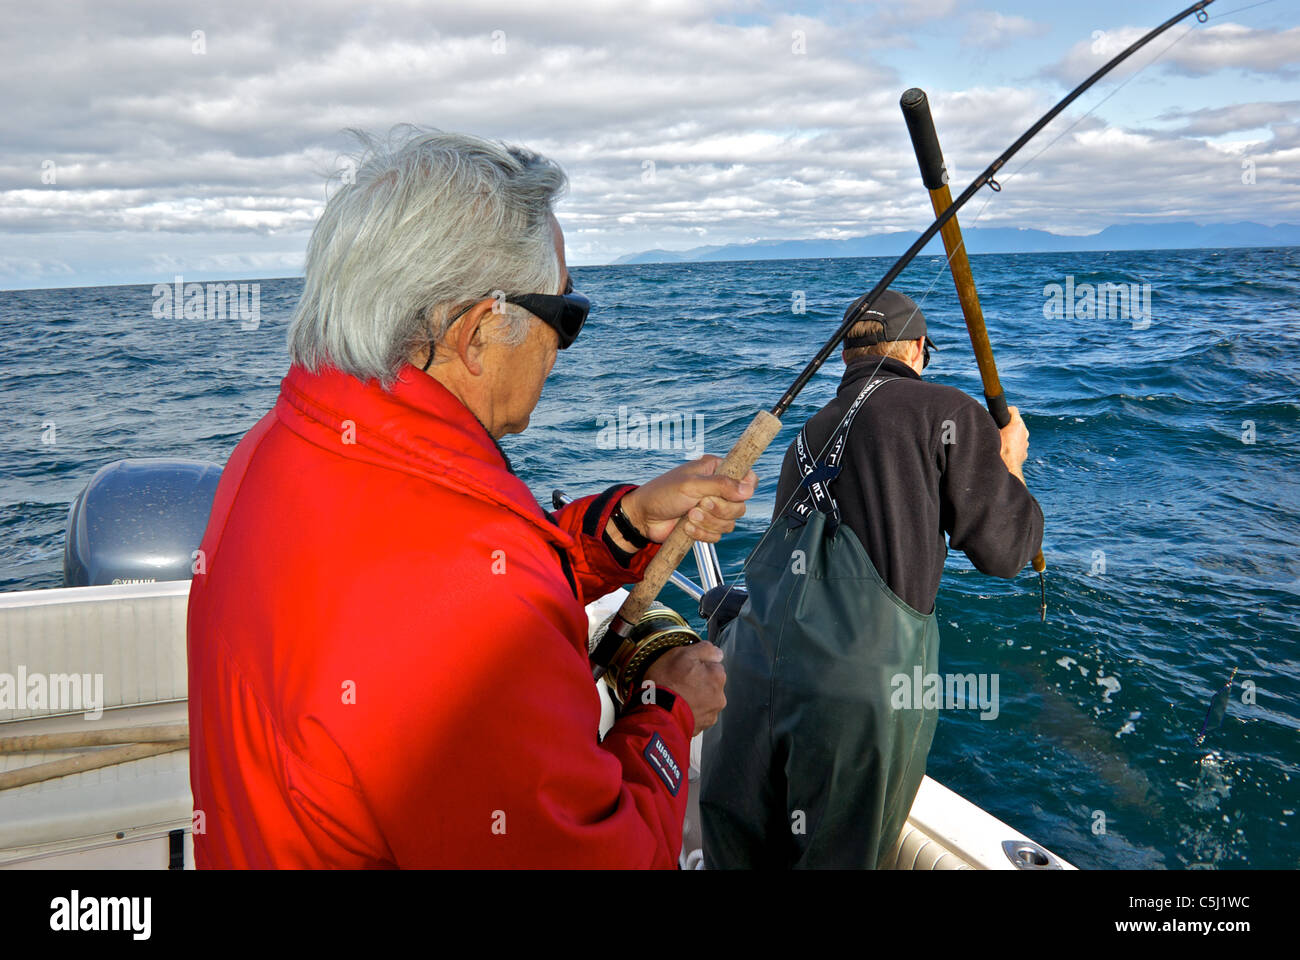 Sport fishing guide ready to harpoon big halibut for charter angler guest rough seas open Pacific Ocean Kyuquot Sound BC Stock Photo